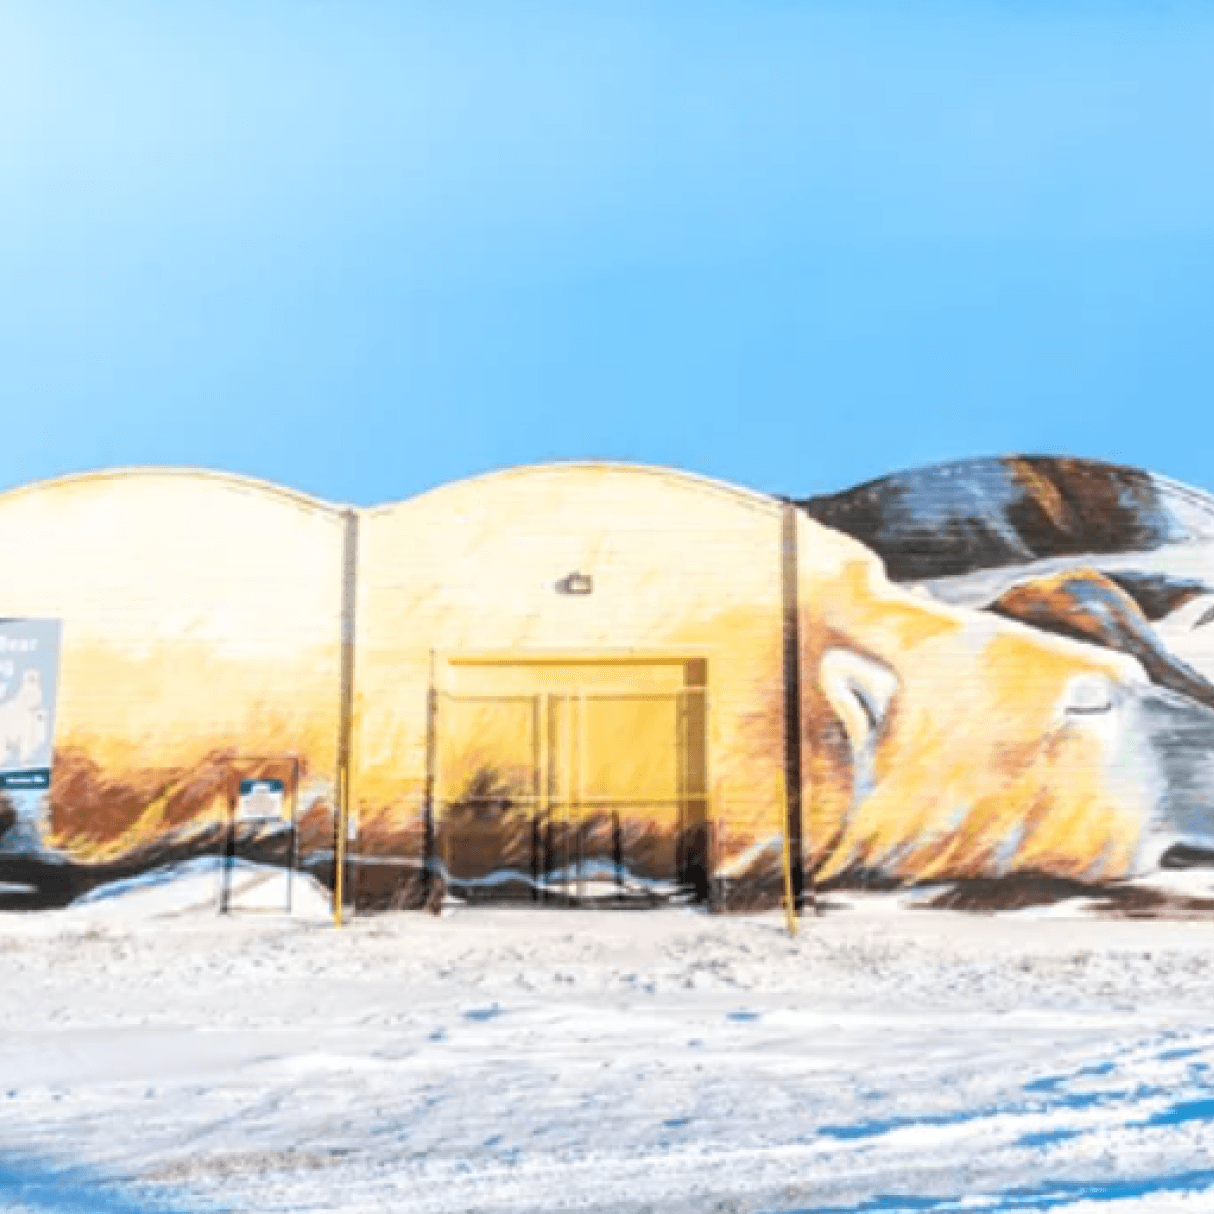 A warehouse-style building sits on the snowy ground. On the building is a mural of a polar bear sleeping.